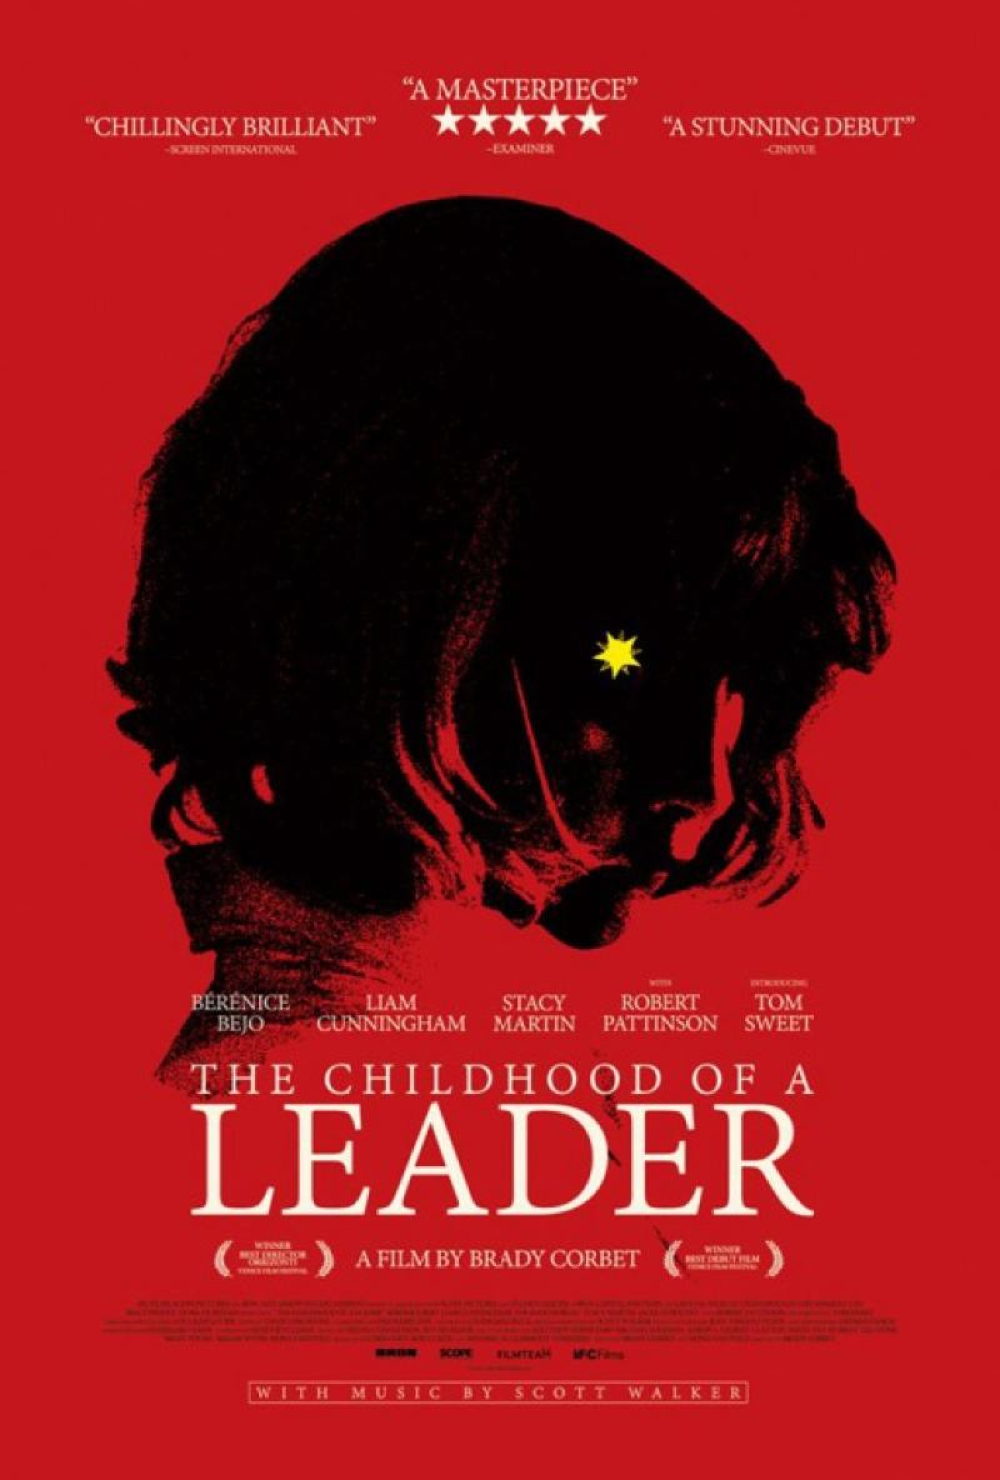 moviegoer.com: THE CHILDHOOD OF A LEADER movie poster